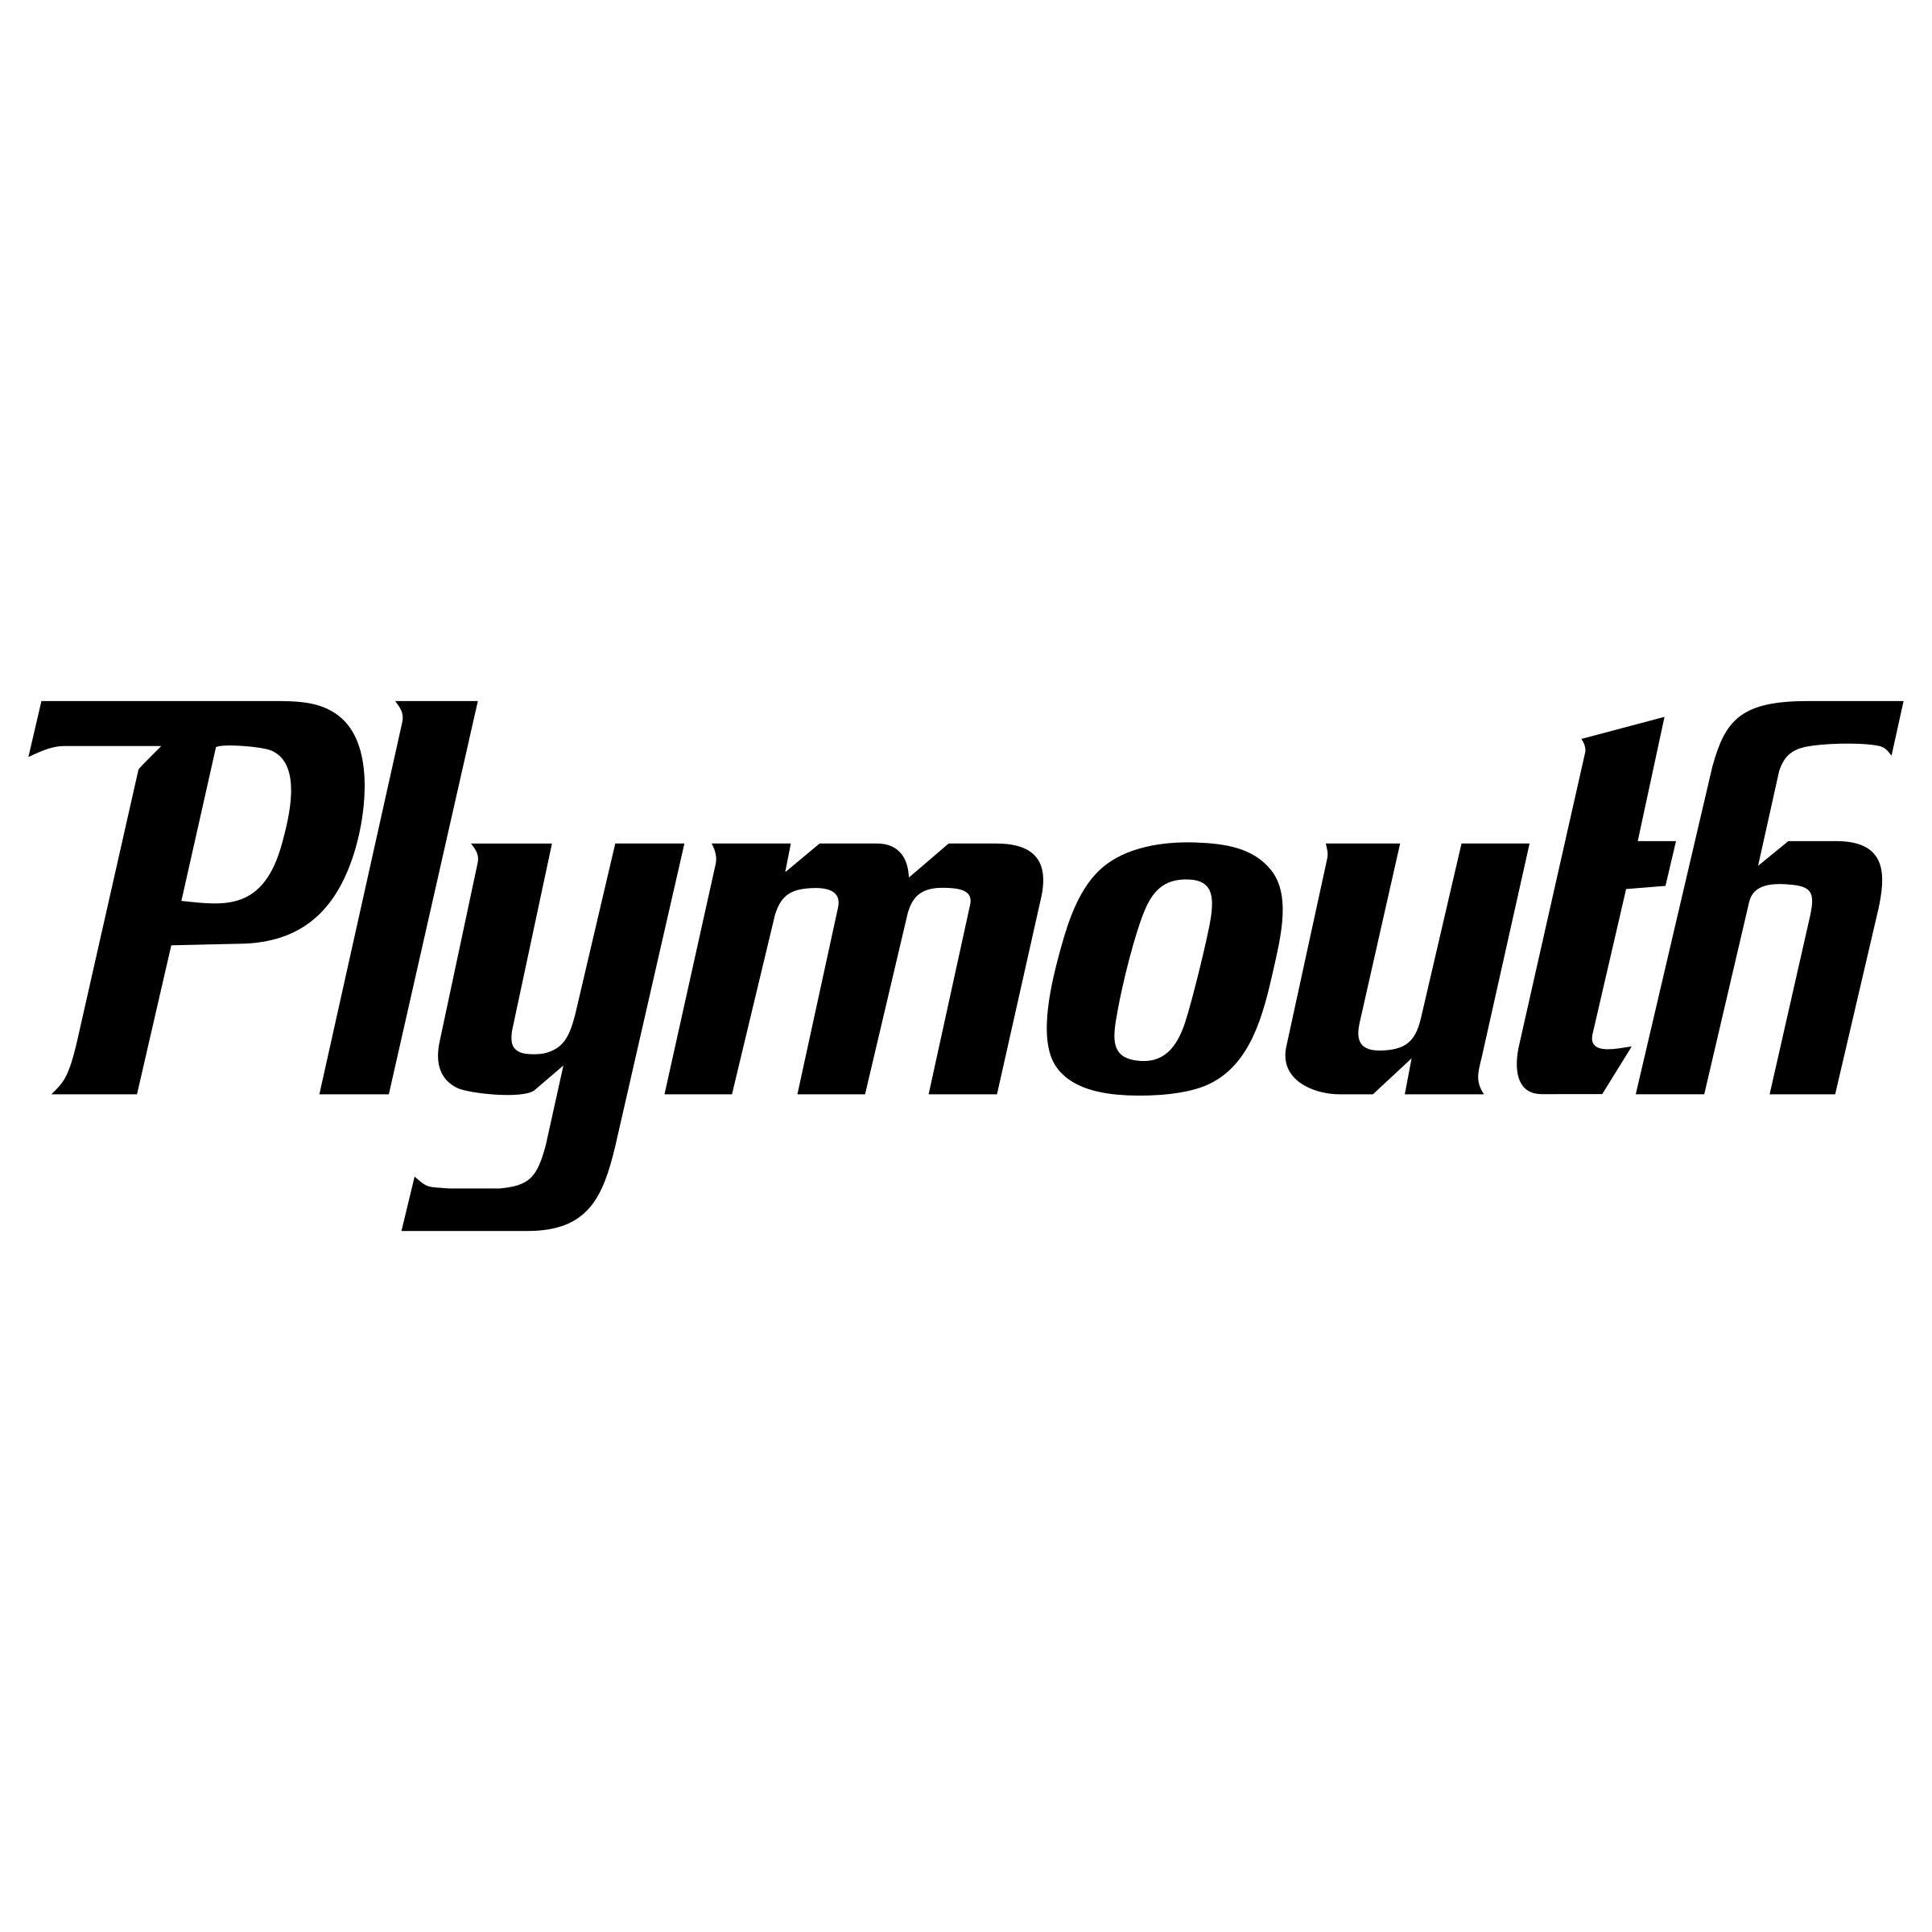 Plymouth Logo - Plymouth Logo PNG Transparent & SVG Vector